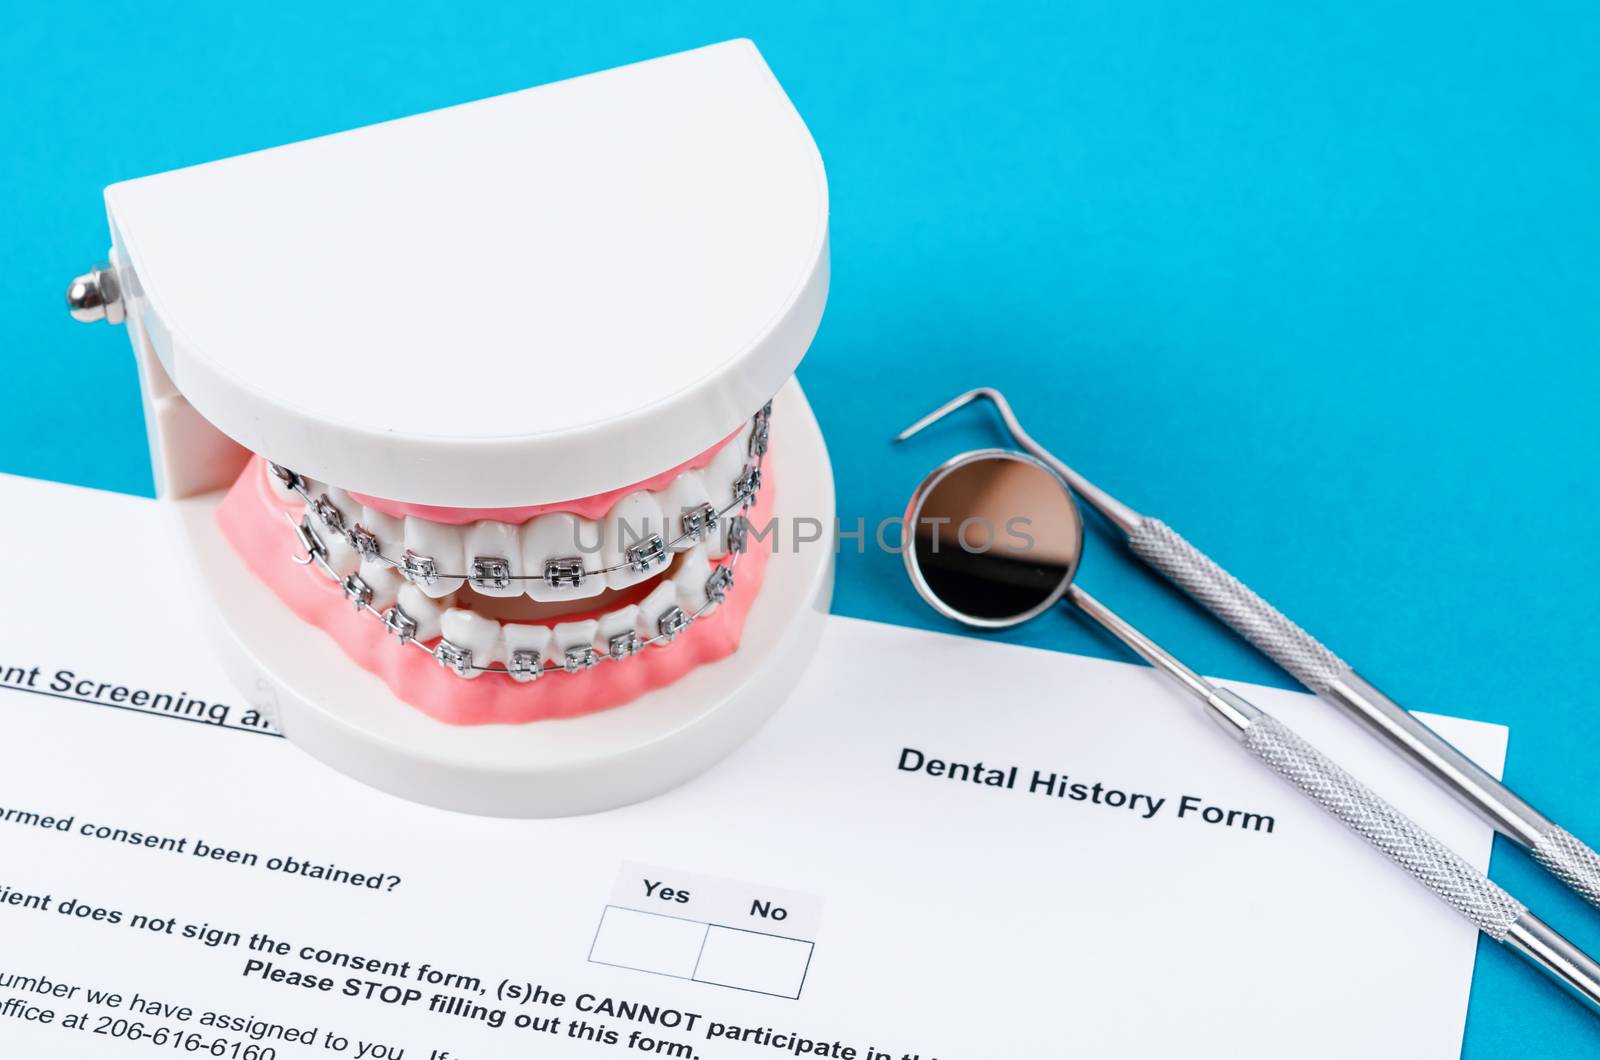 Dental History Form with model tooth and dental instruments. Dental health and teeth care concept.